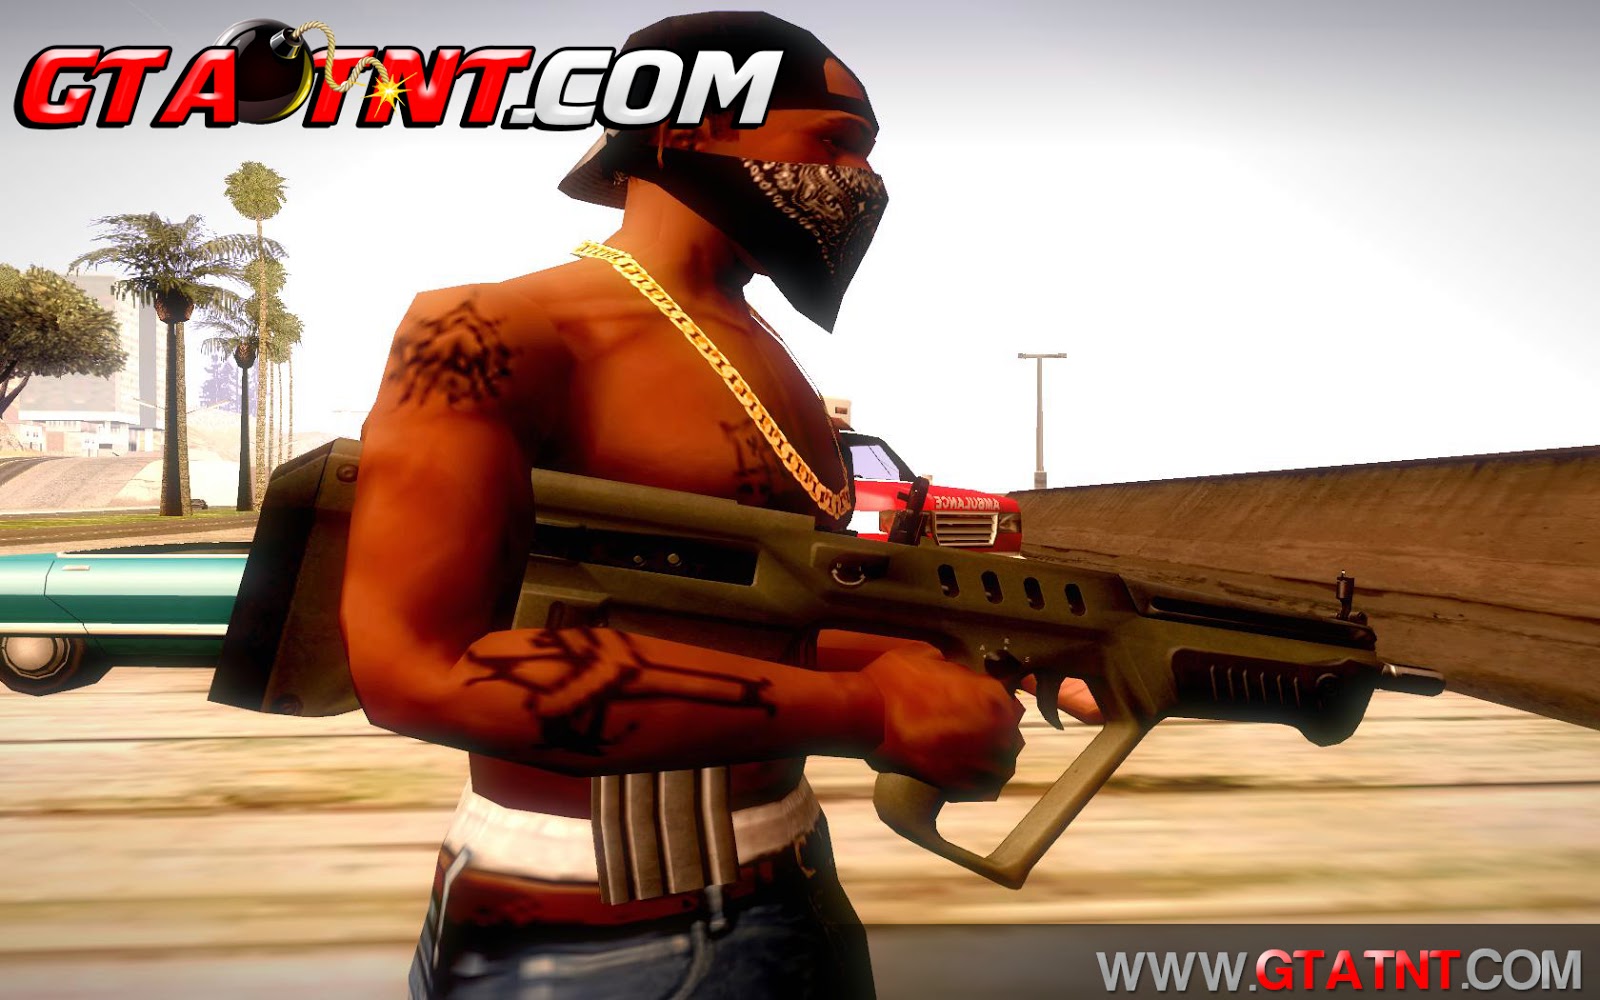 Gta San Andreas 2013 By Slim Thug Download Utorrent For 112